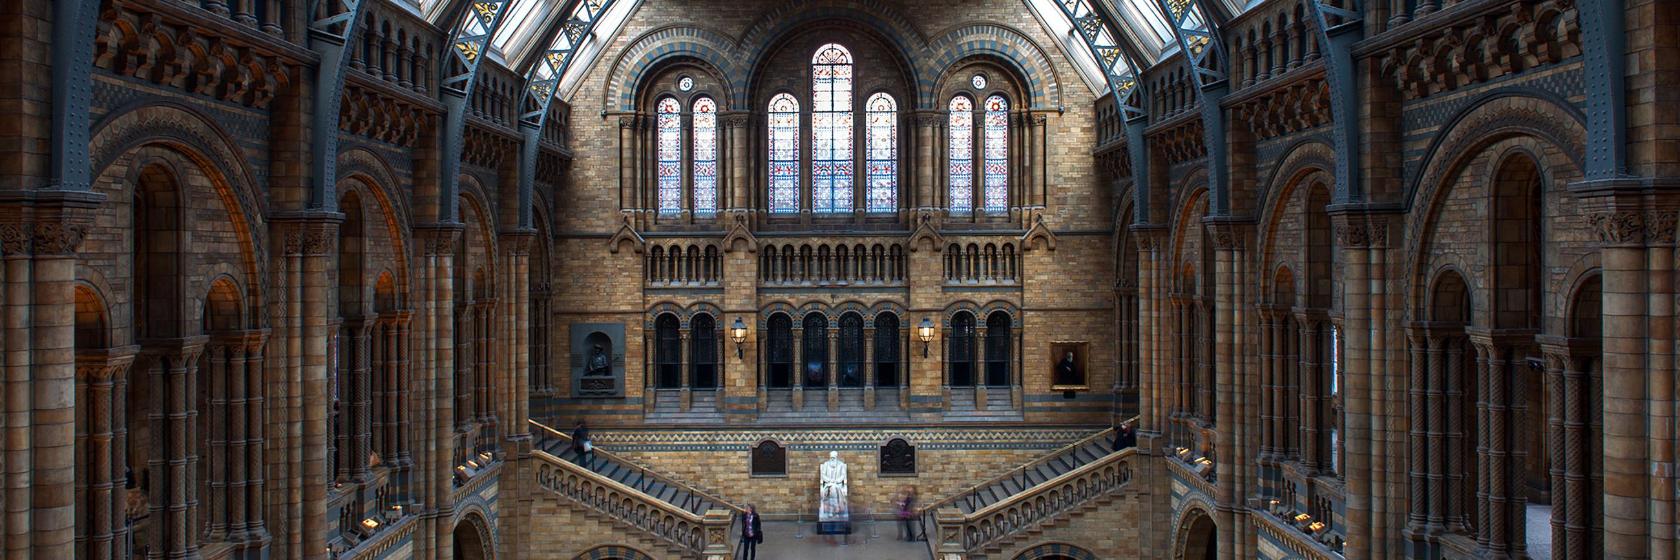 The 10 best hotels near Natural History Museum London in ...